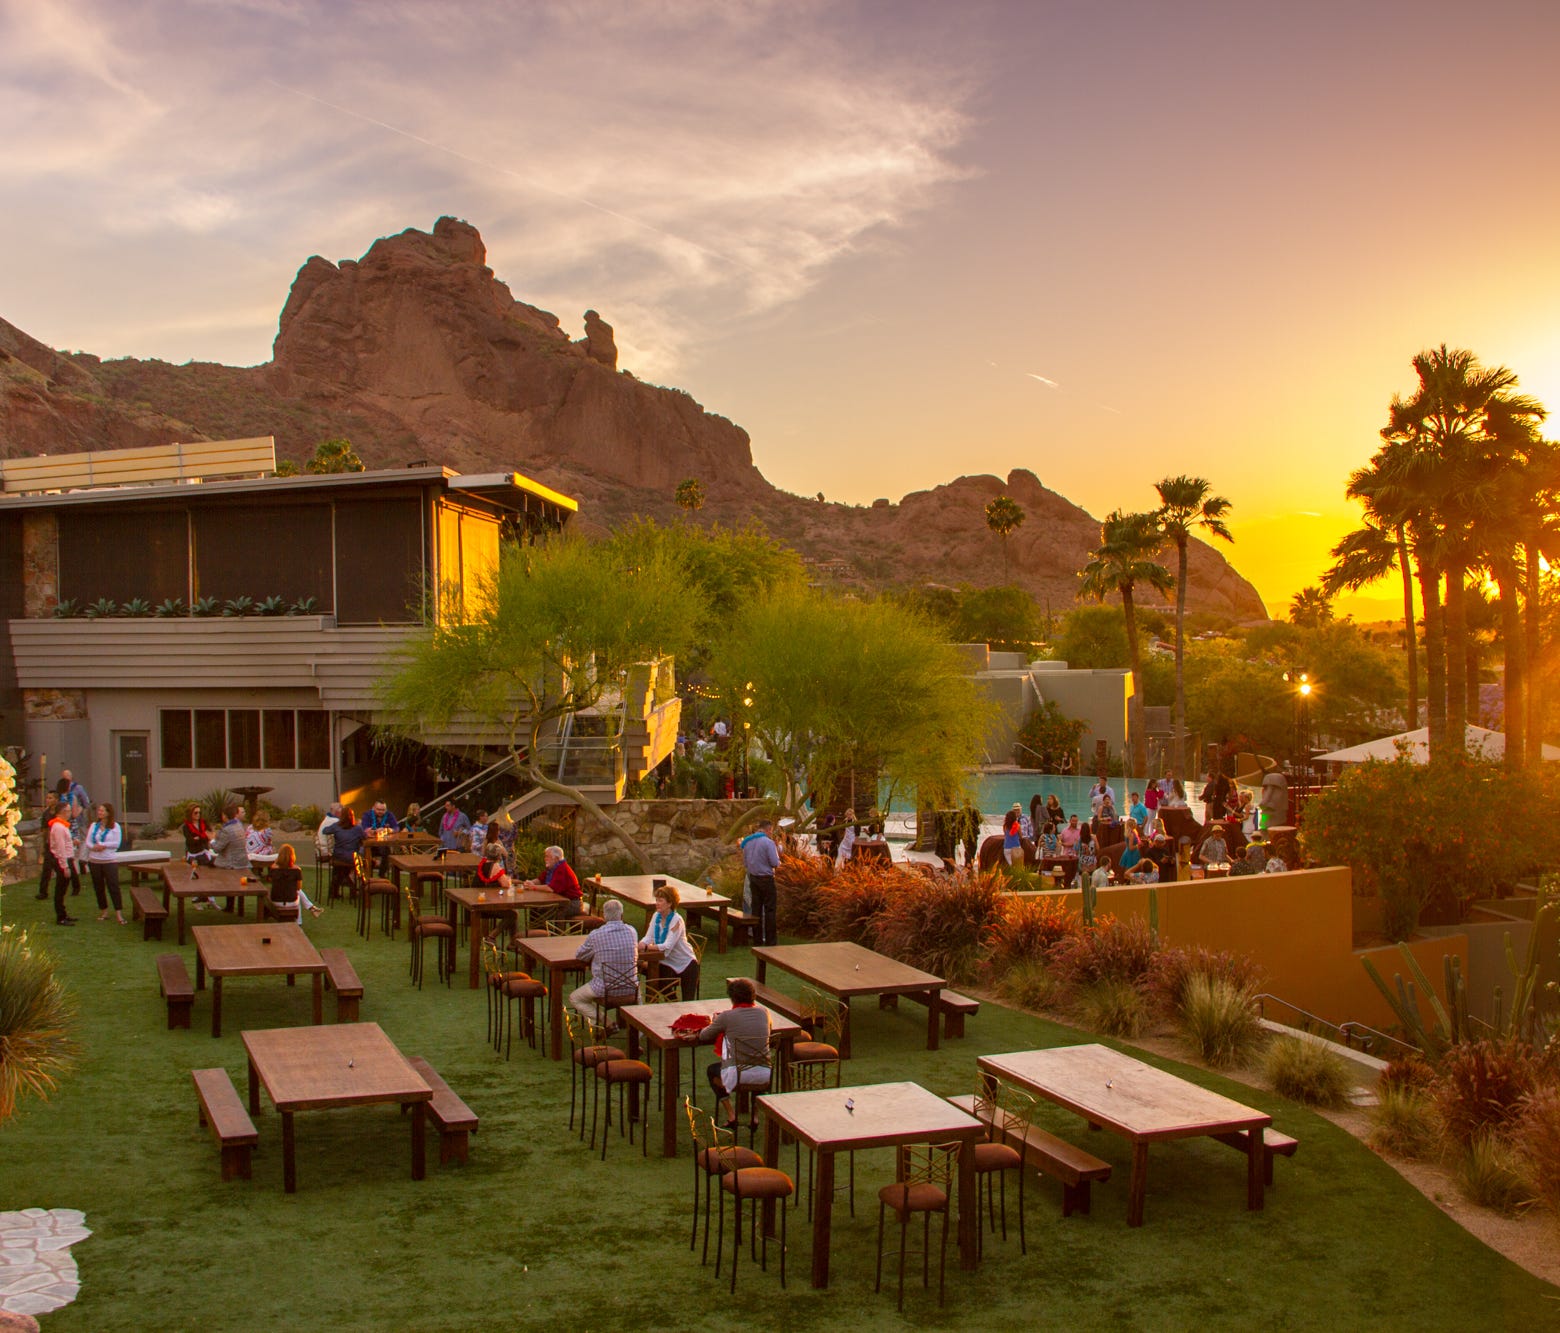 Nirvana Food and Wine Festival will take place at Sanctuary on Camelback Mountain Resort & Spa in Scottsdale, Ariz., April 19-22.